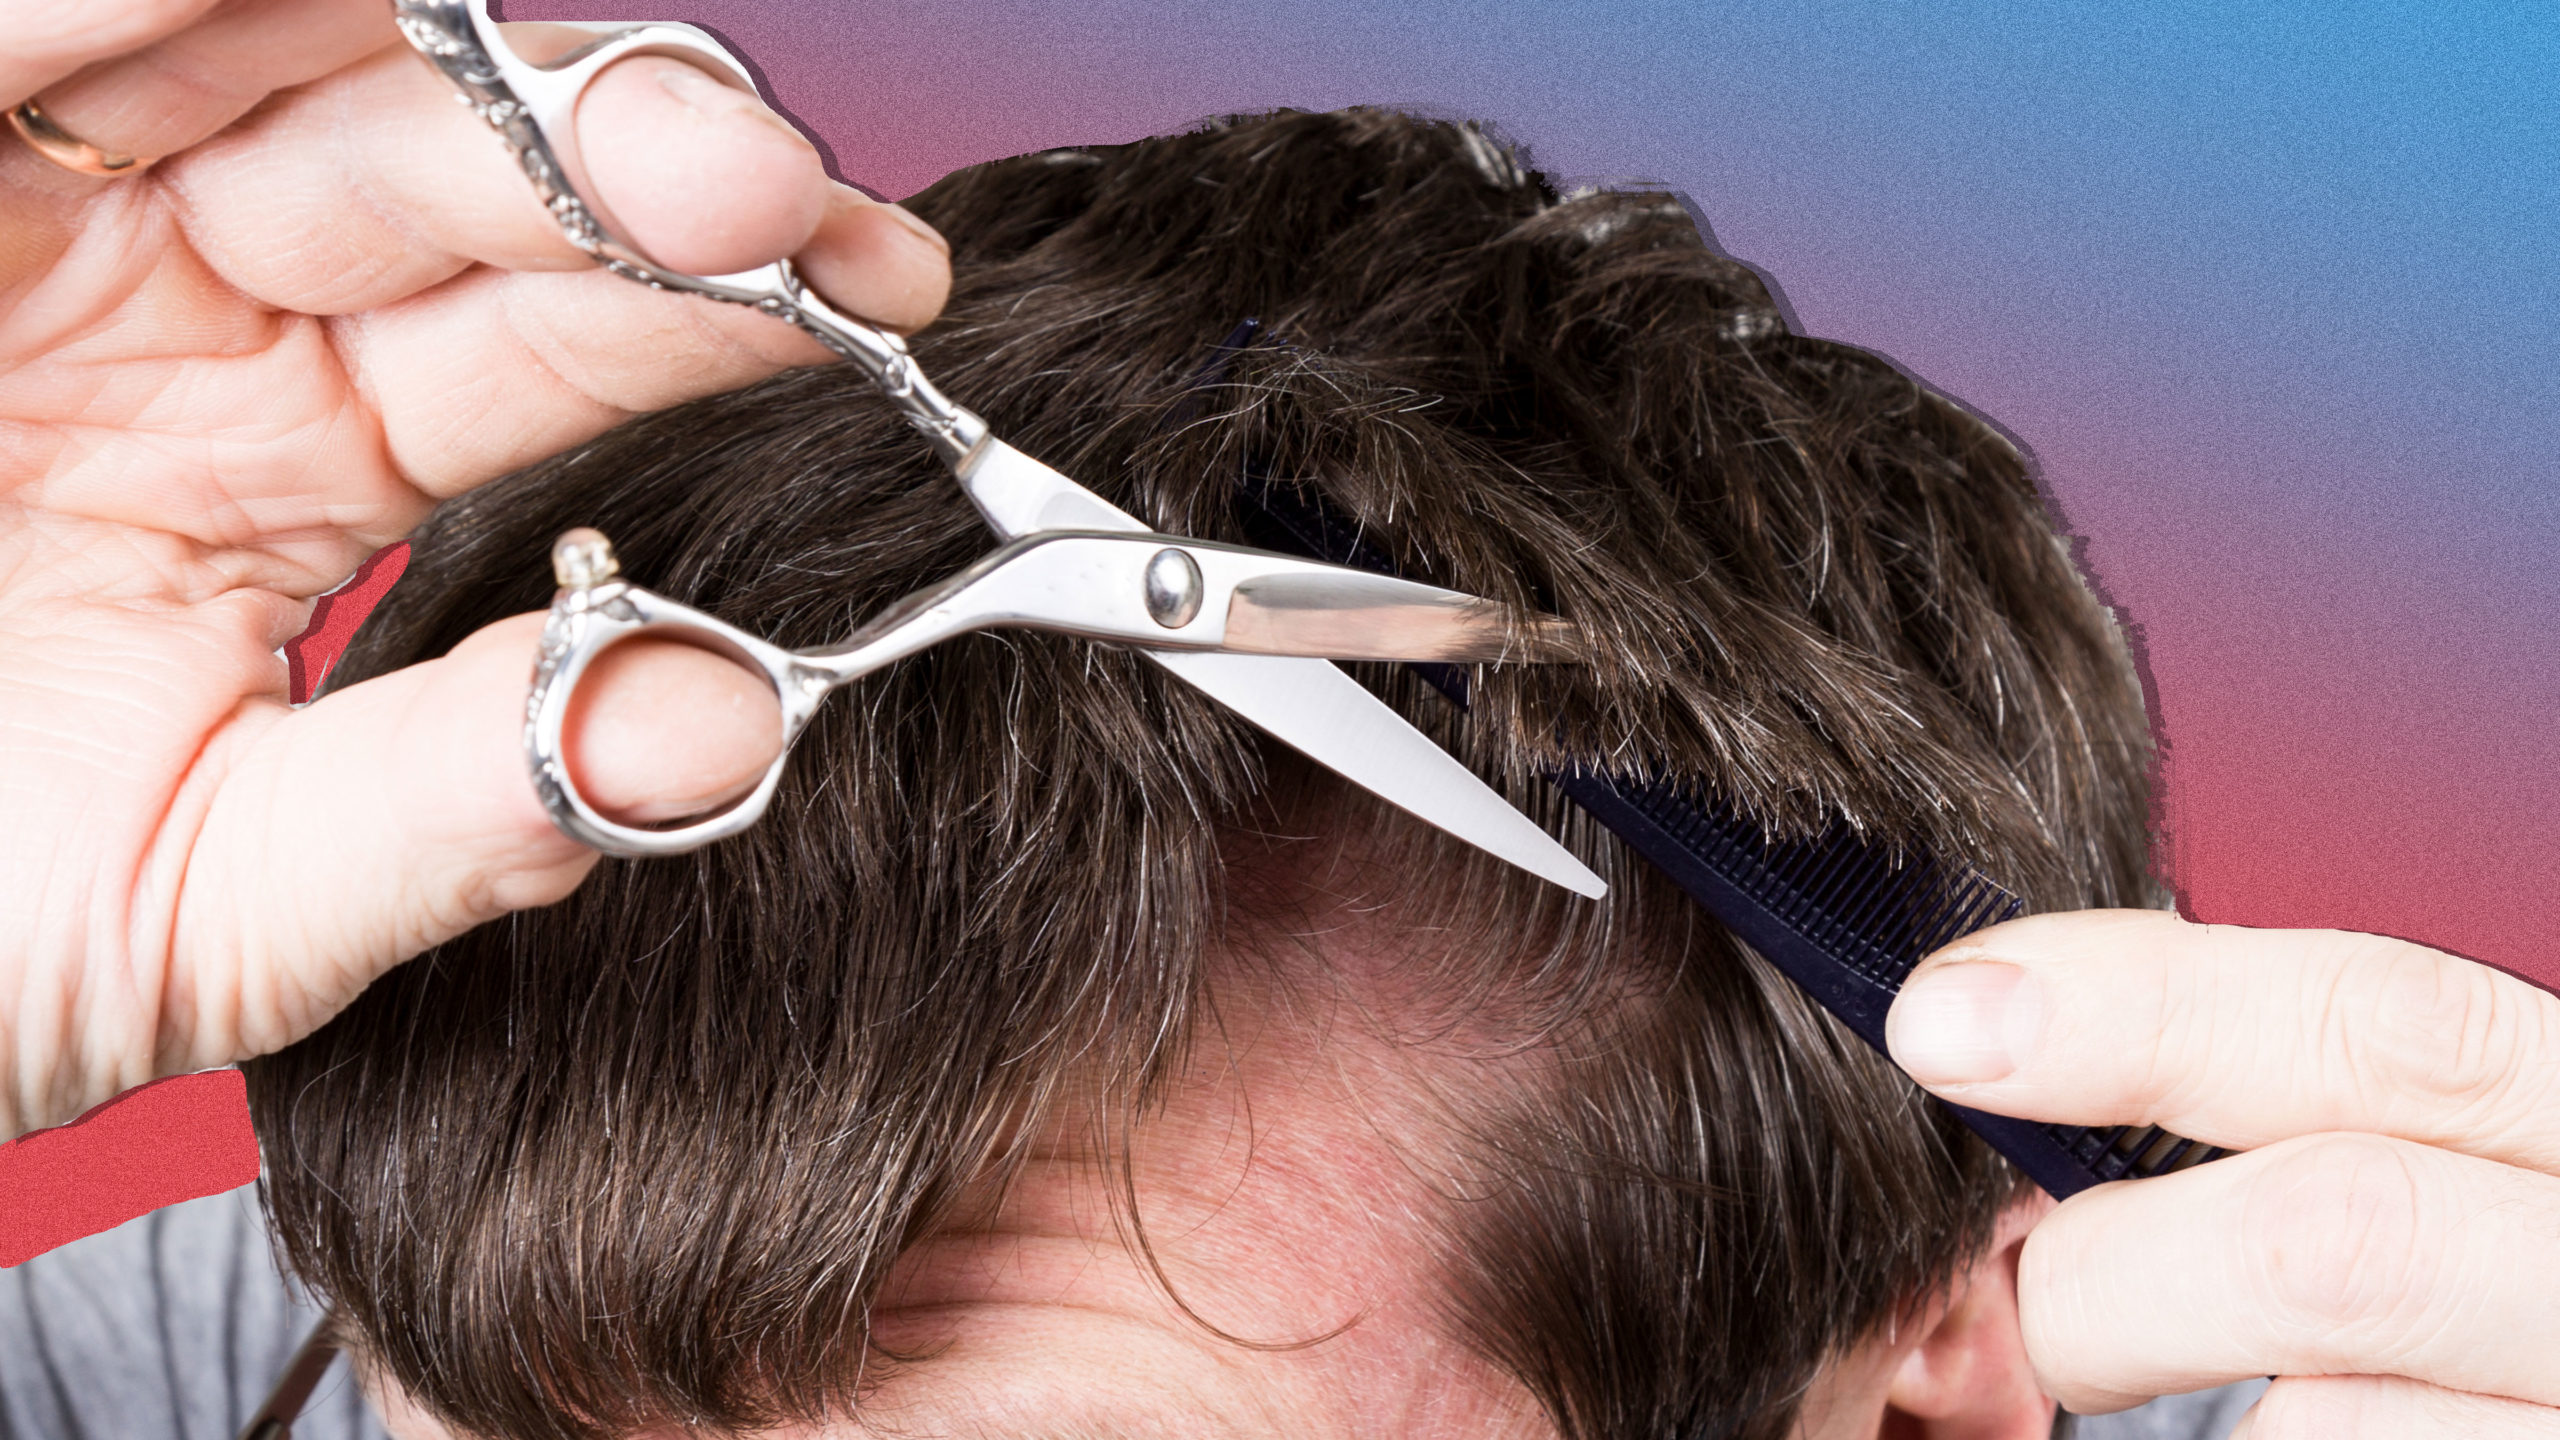 A Barber's Guide to Trimming Your Hair Between Haircuts - Dollar Shave Club  Original Content